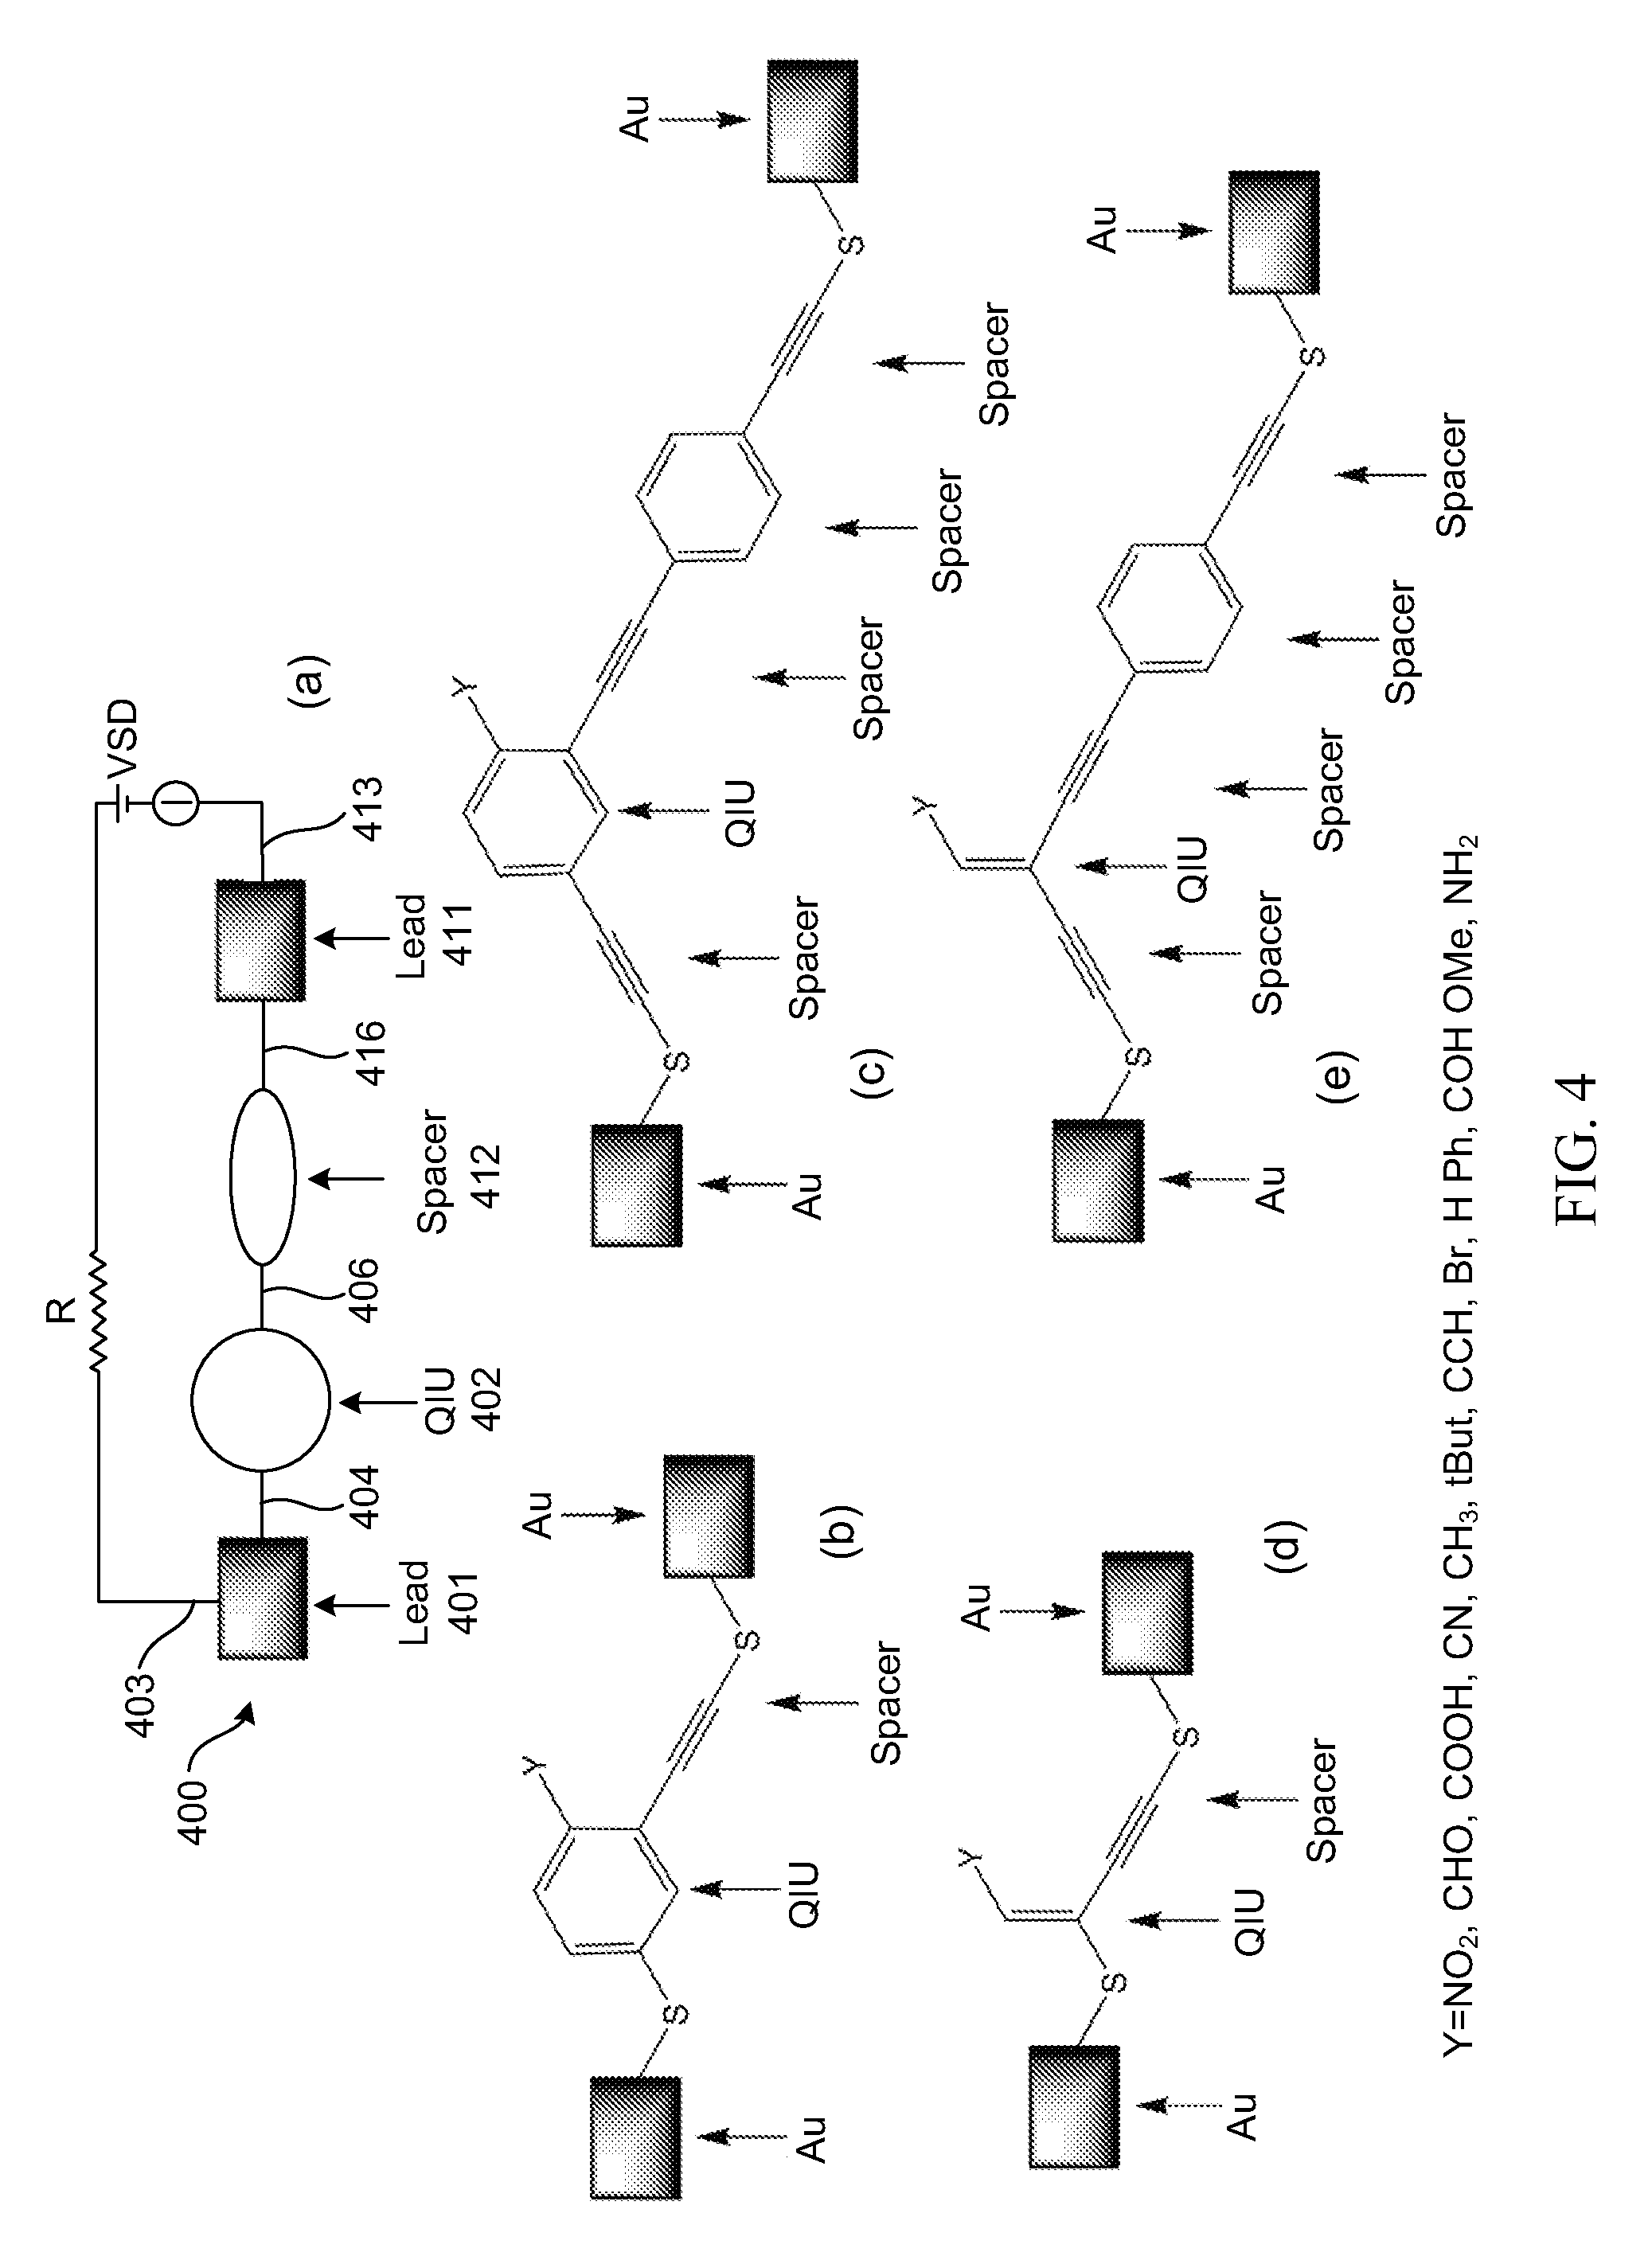 Molecular quantum interference apparatus and applications of same